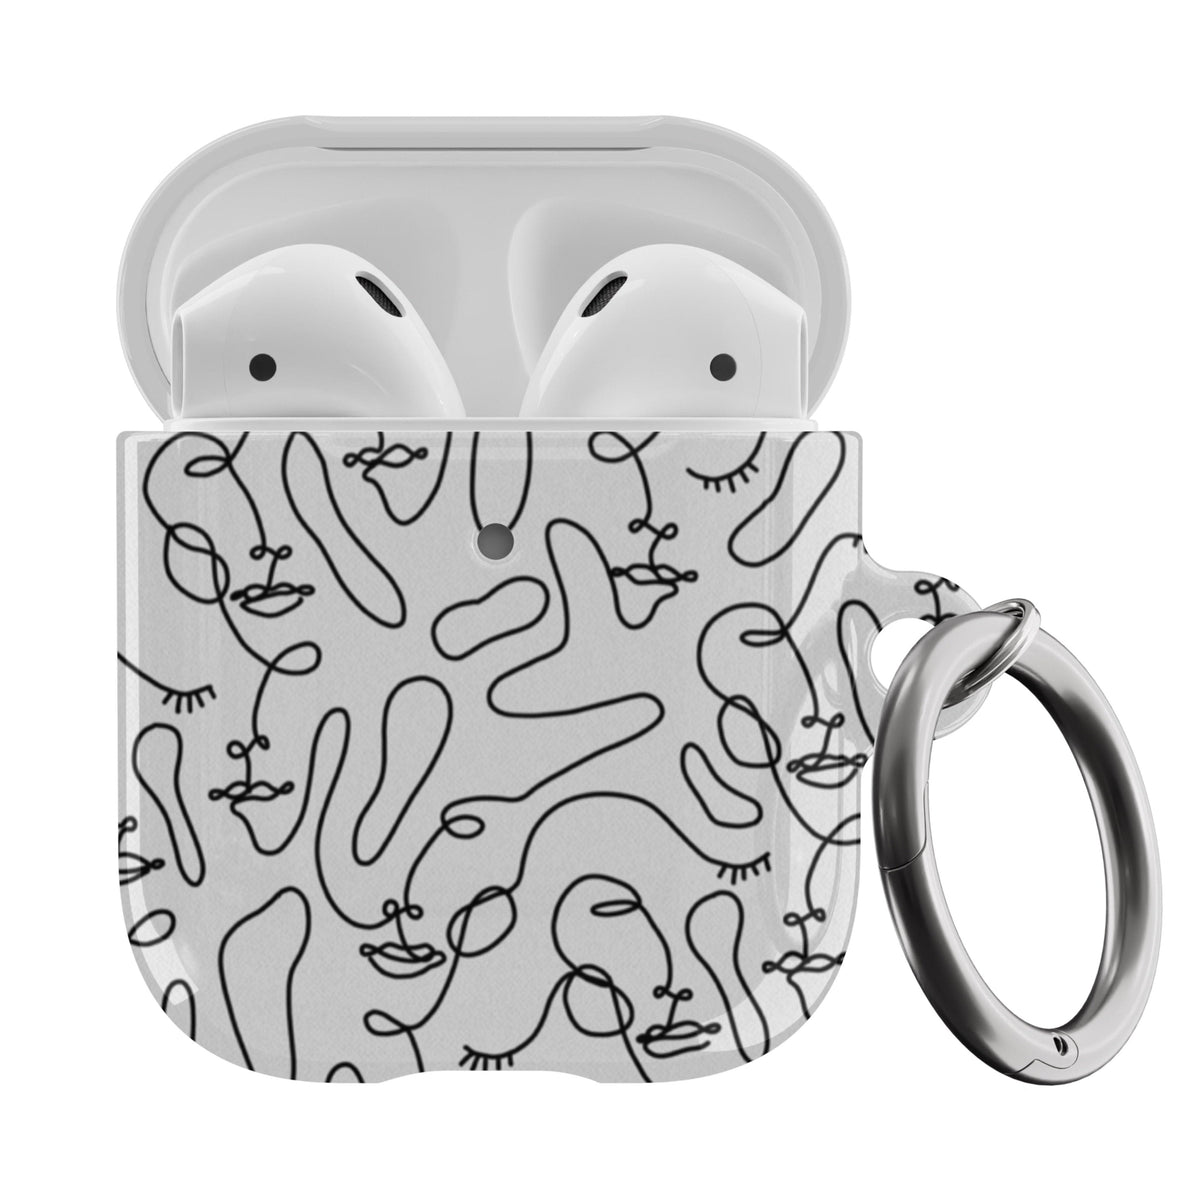 disk flyde Uskyld Minimal Line Art Faces Airpods Case by The Urban Flair